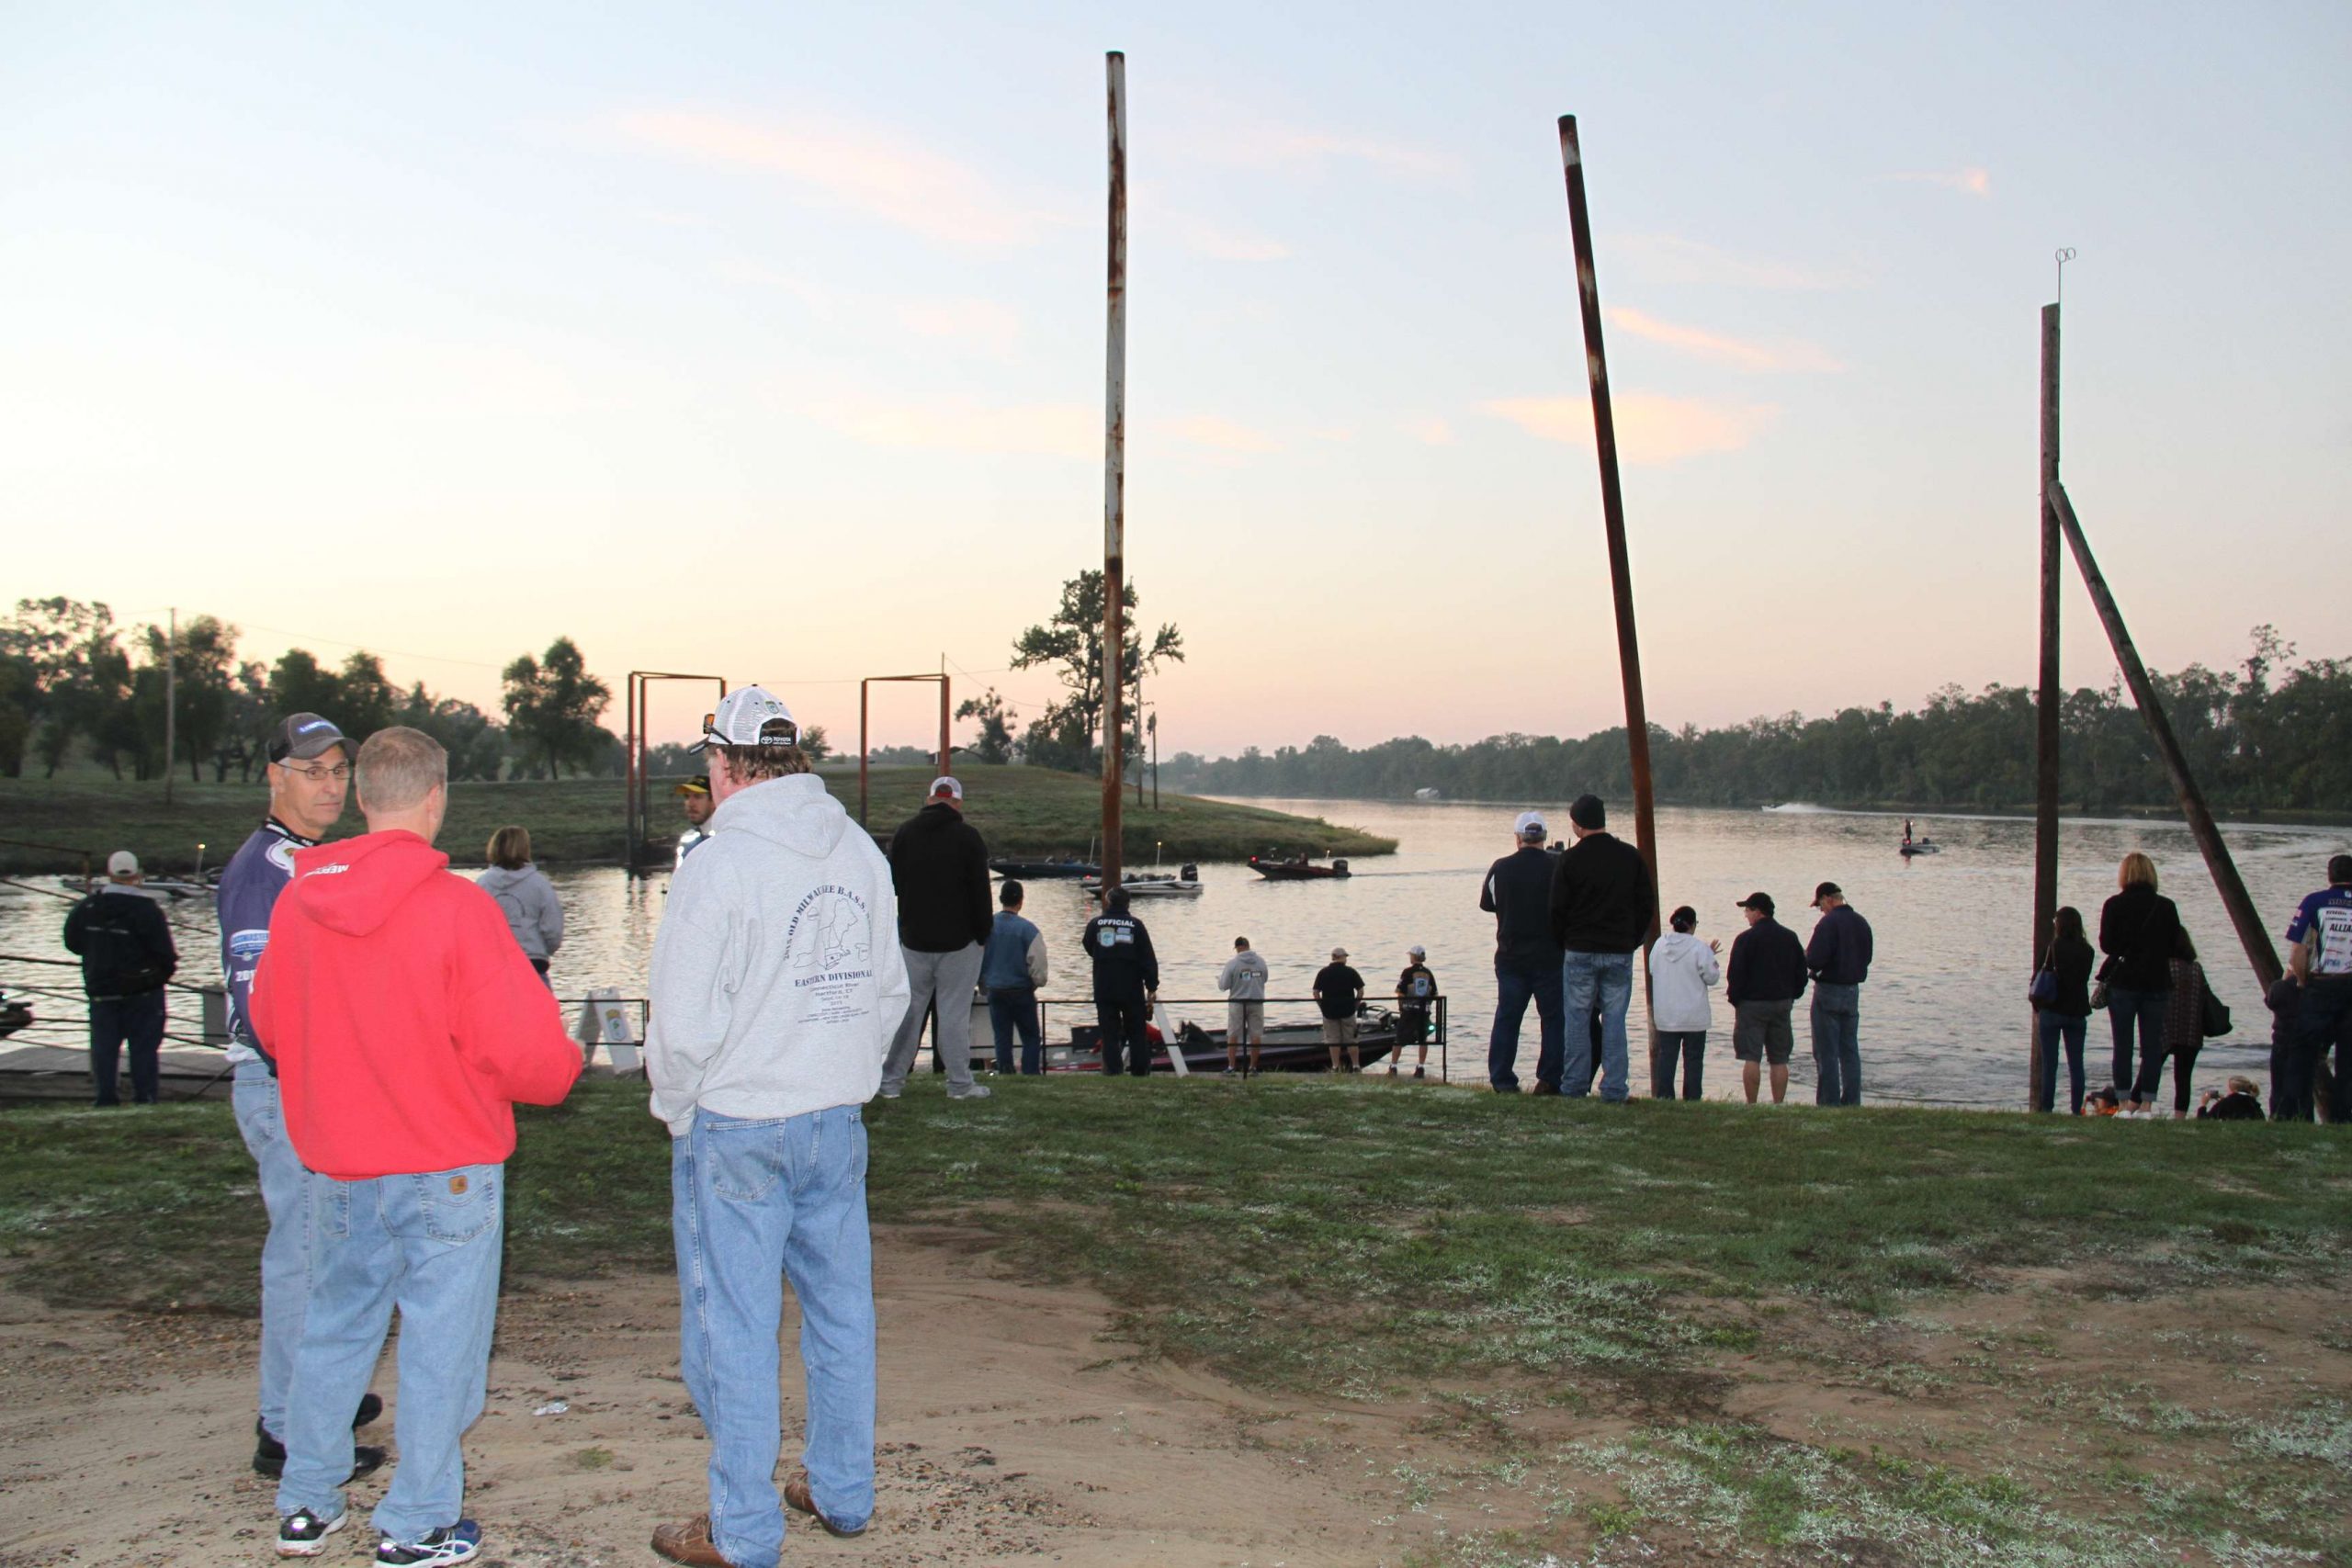 Family, friends and fans line the banks, wishing the anglers well.